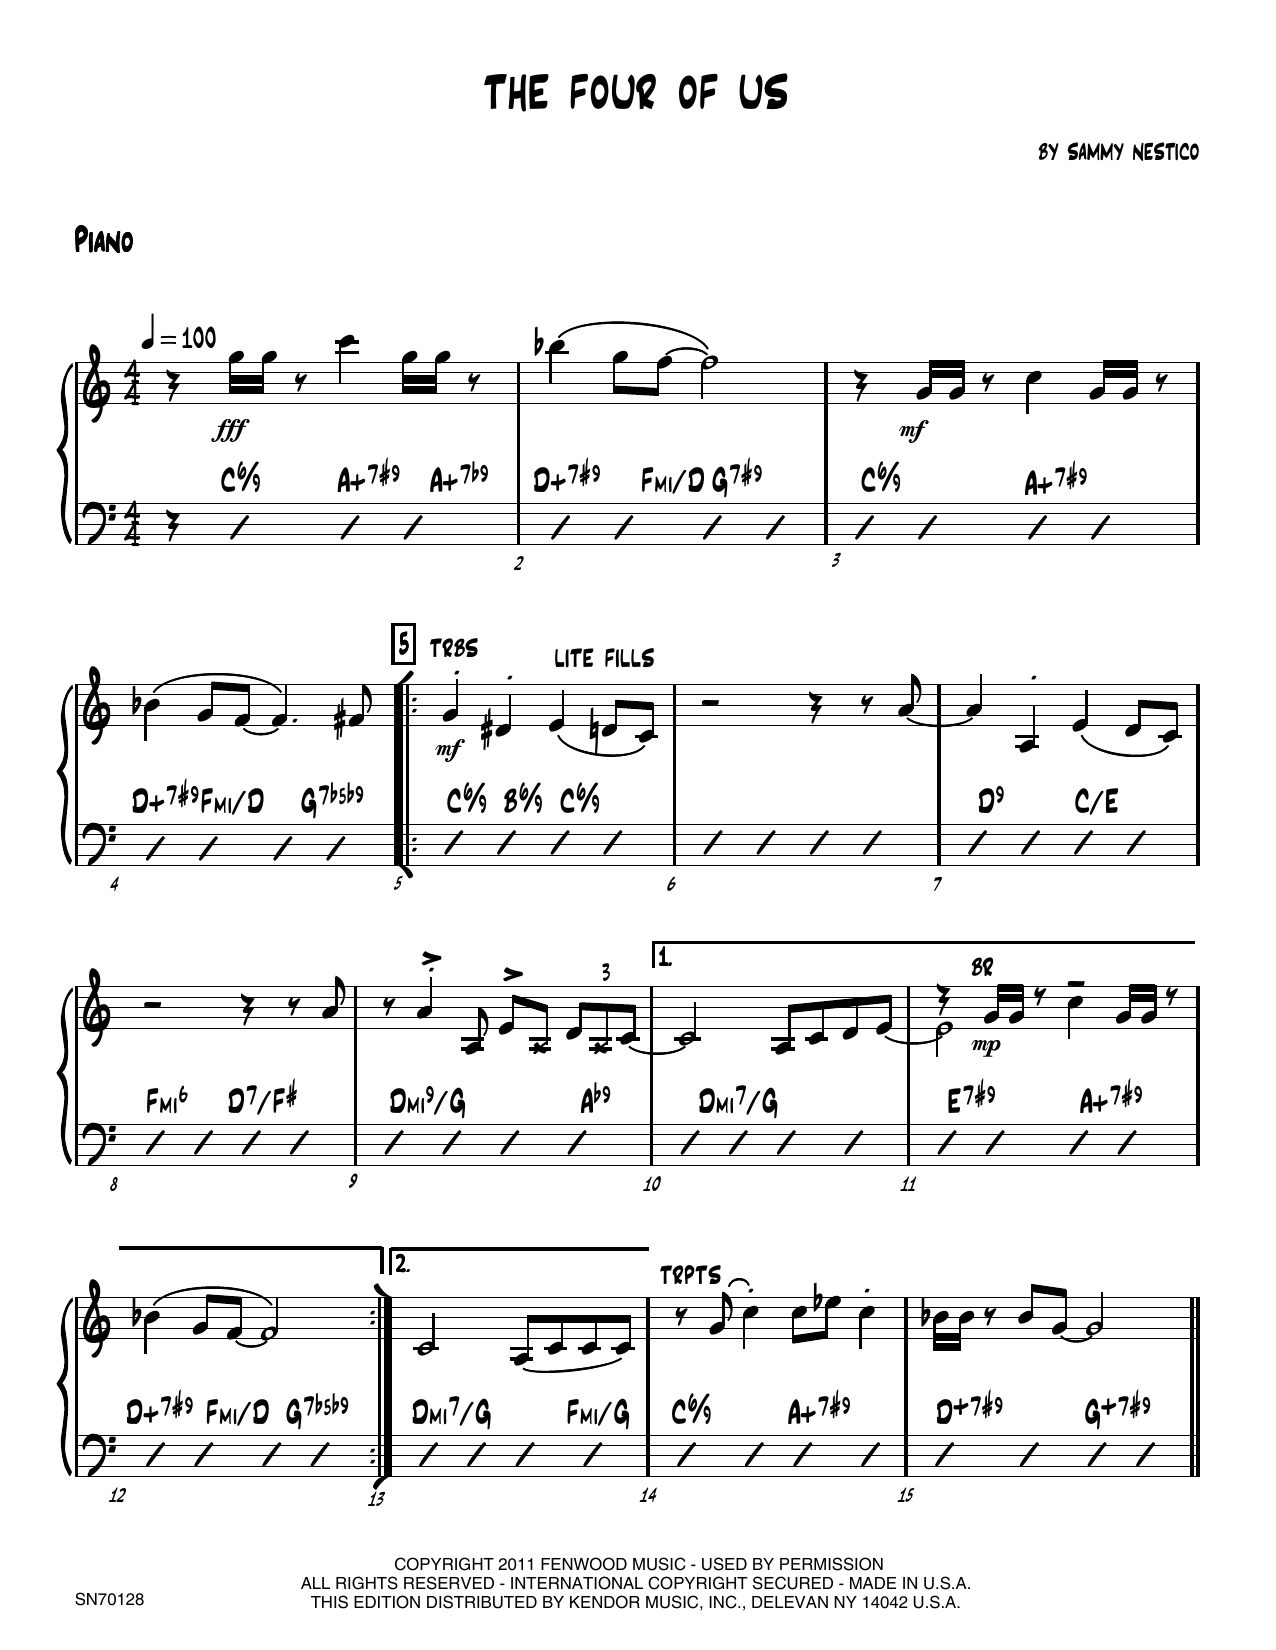 Download Sammy Nestico The Four Of Us - Piano Sheet Music